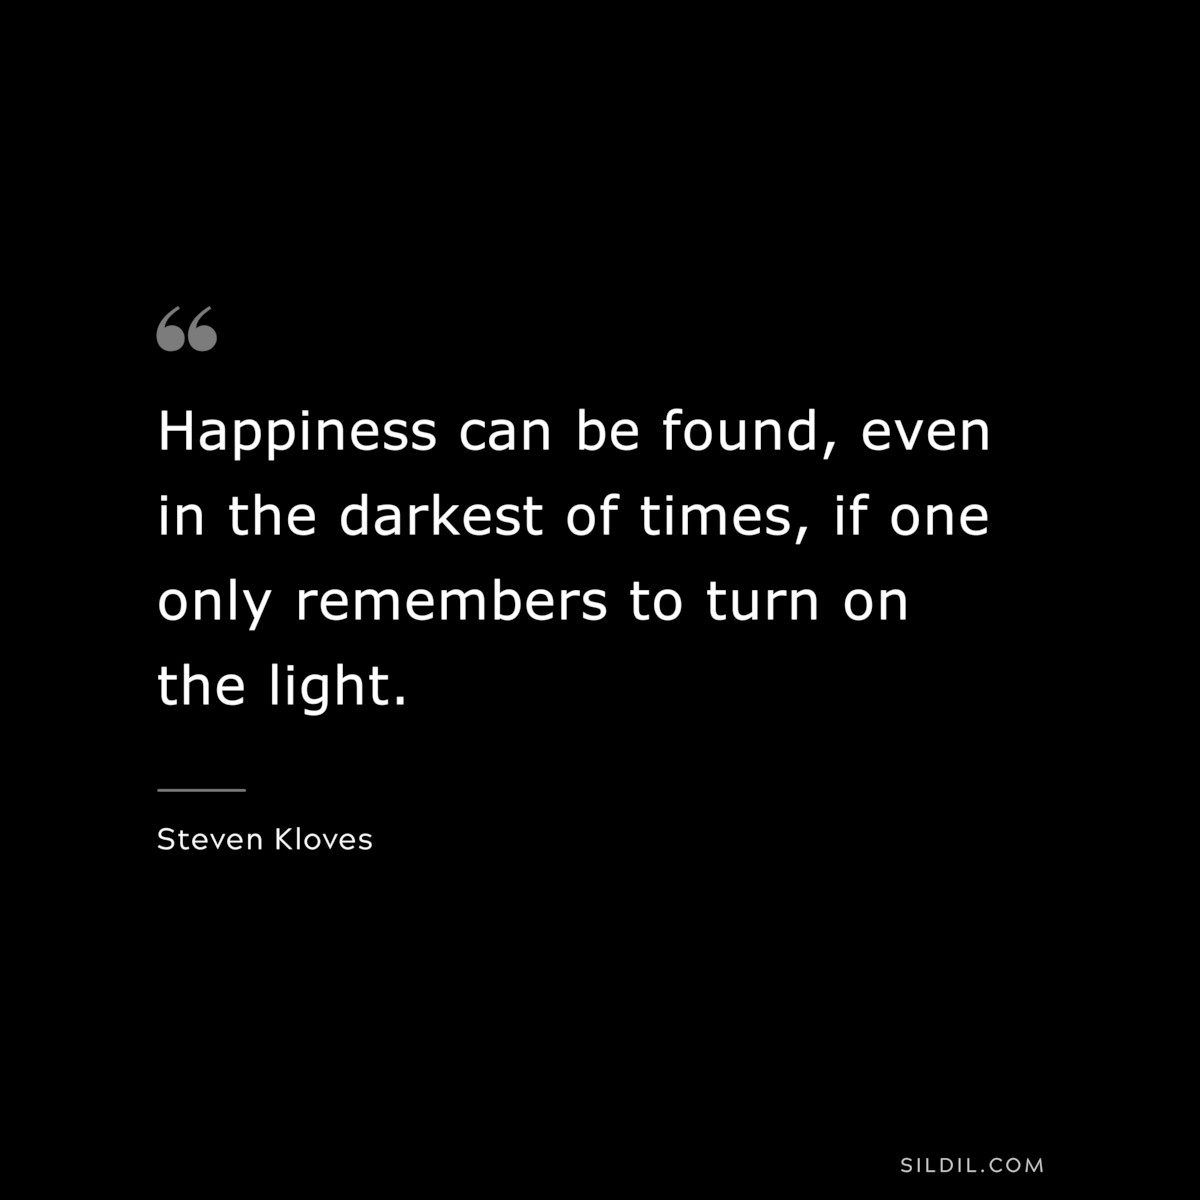 Happiness can be found, even in the darkest of times, if one only remembers to turn on the light. ― Steven Kloves